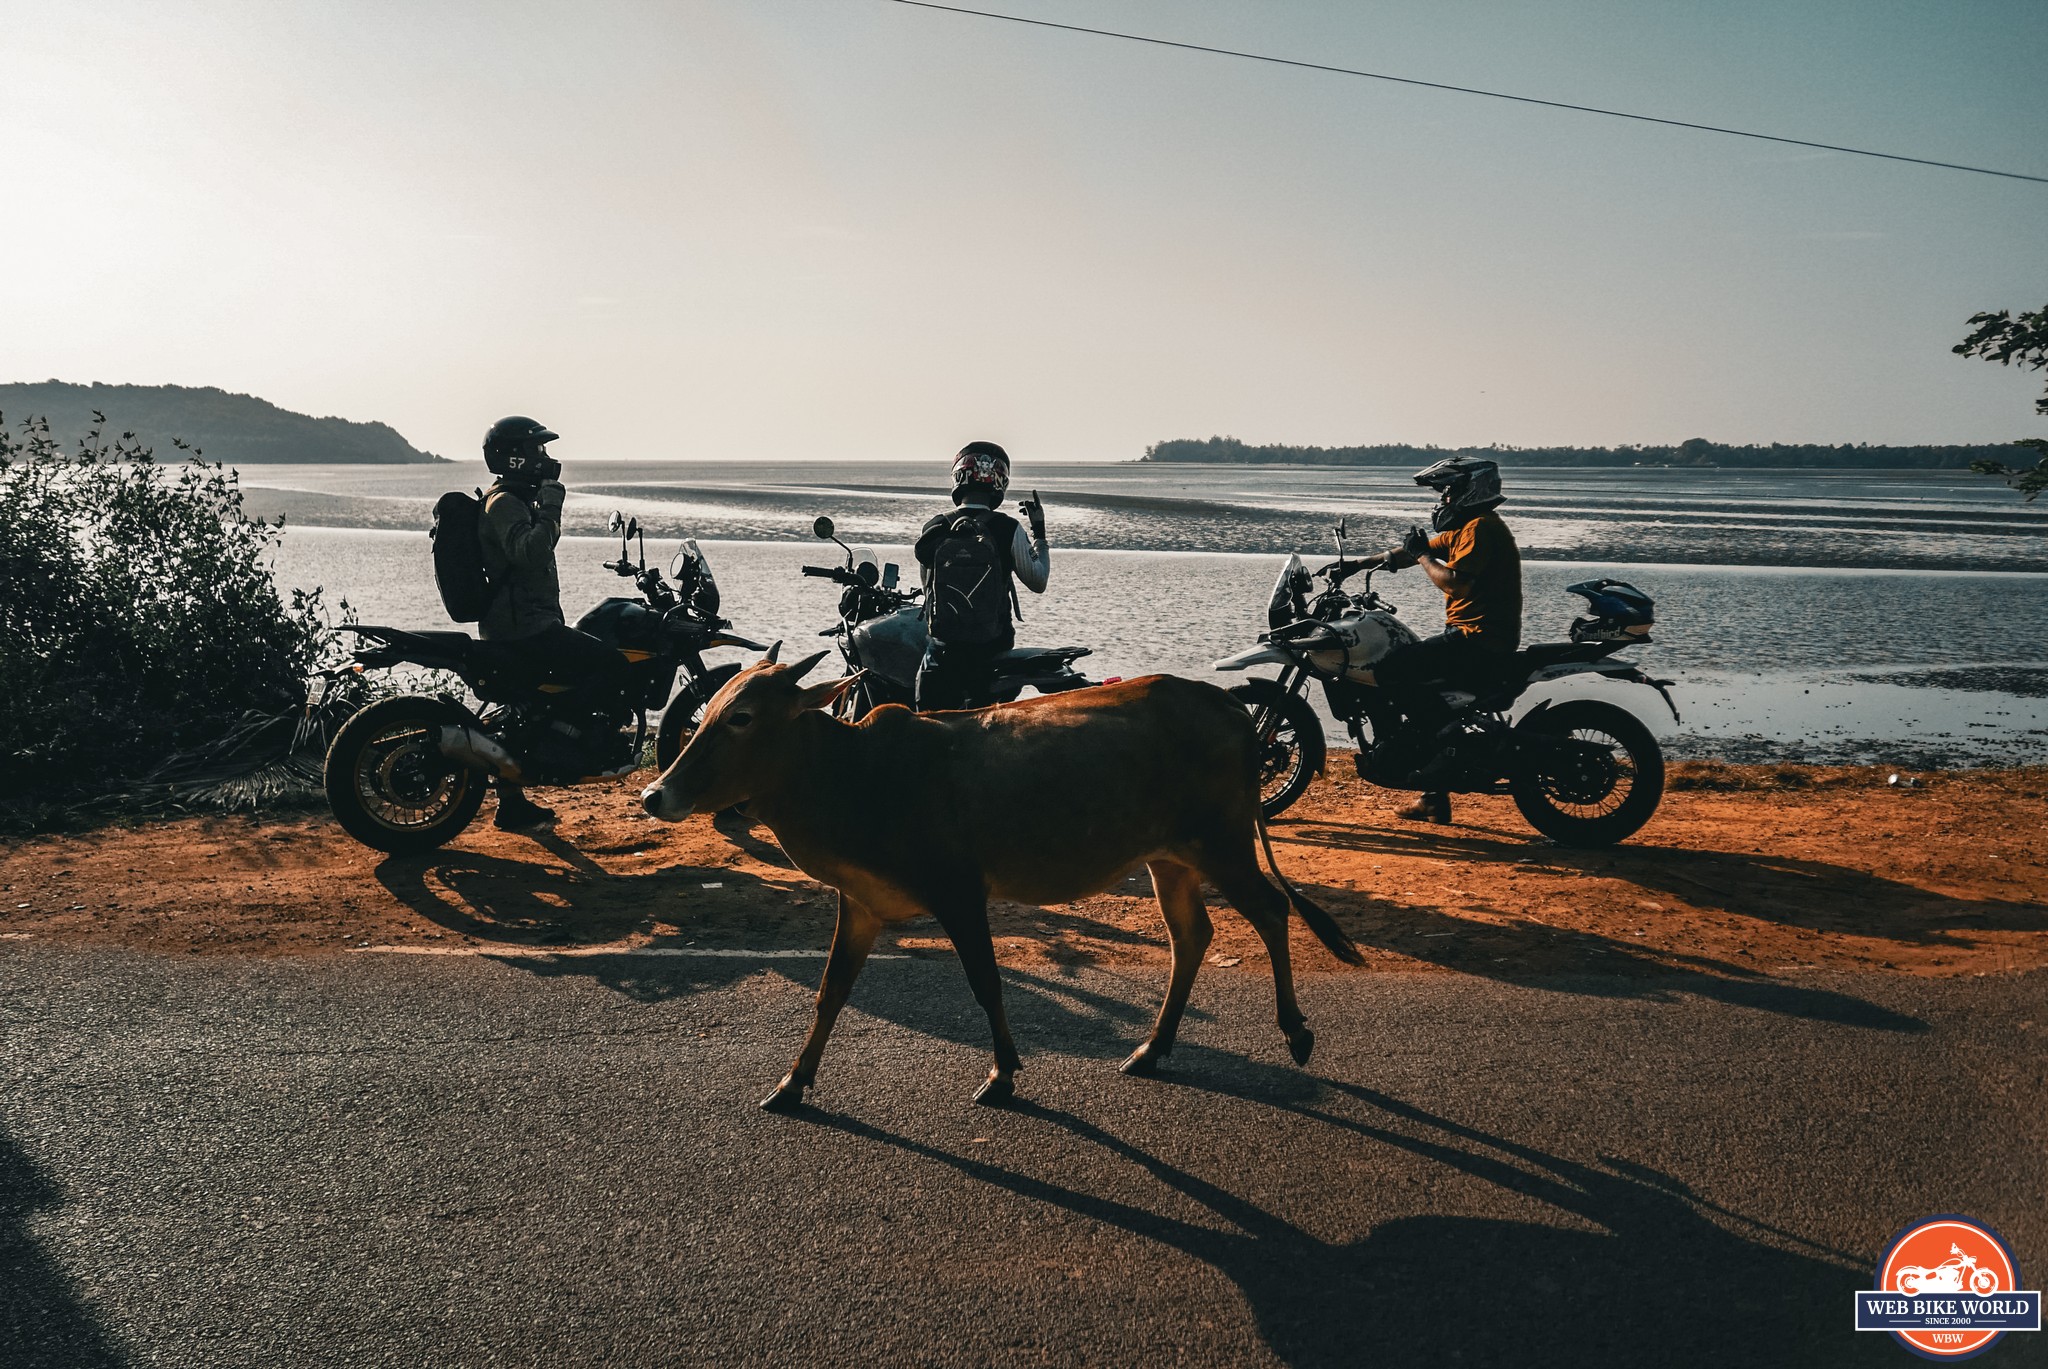 A cow walking in front of motorcyclists on Himalayan 450s